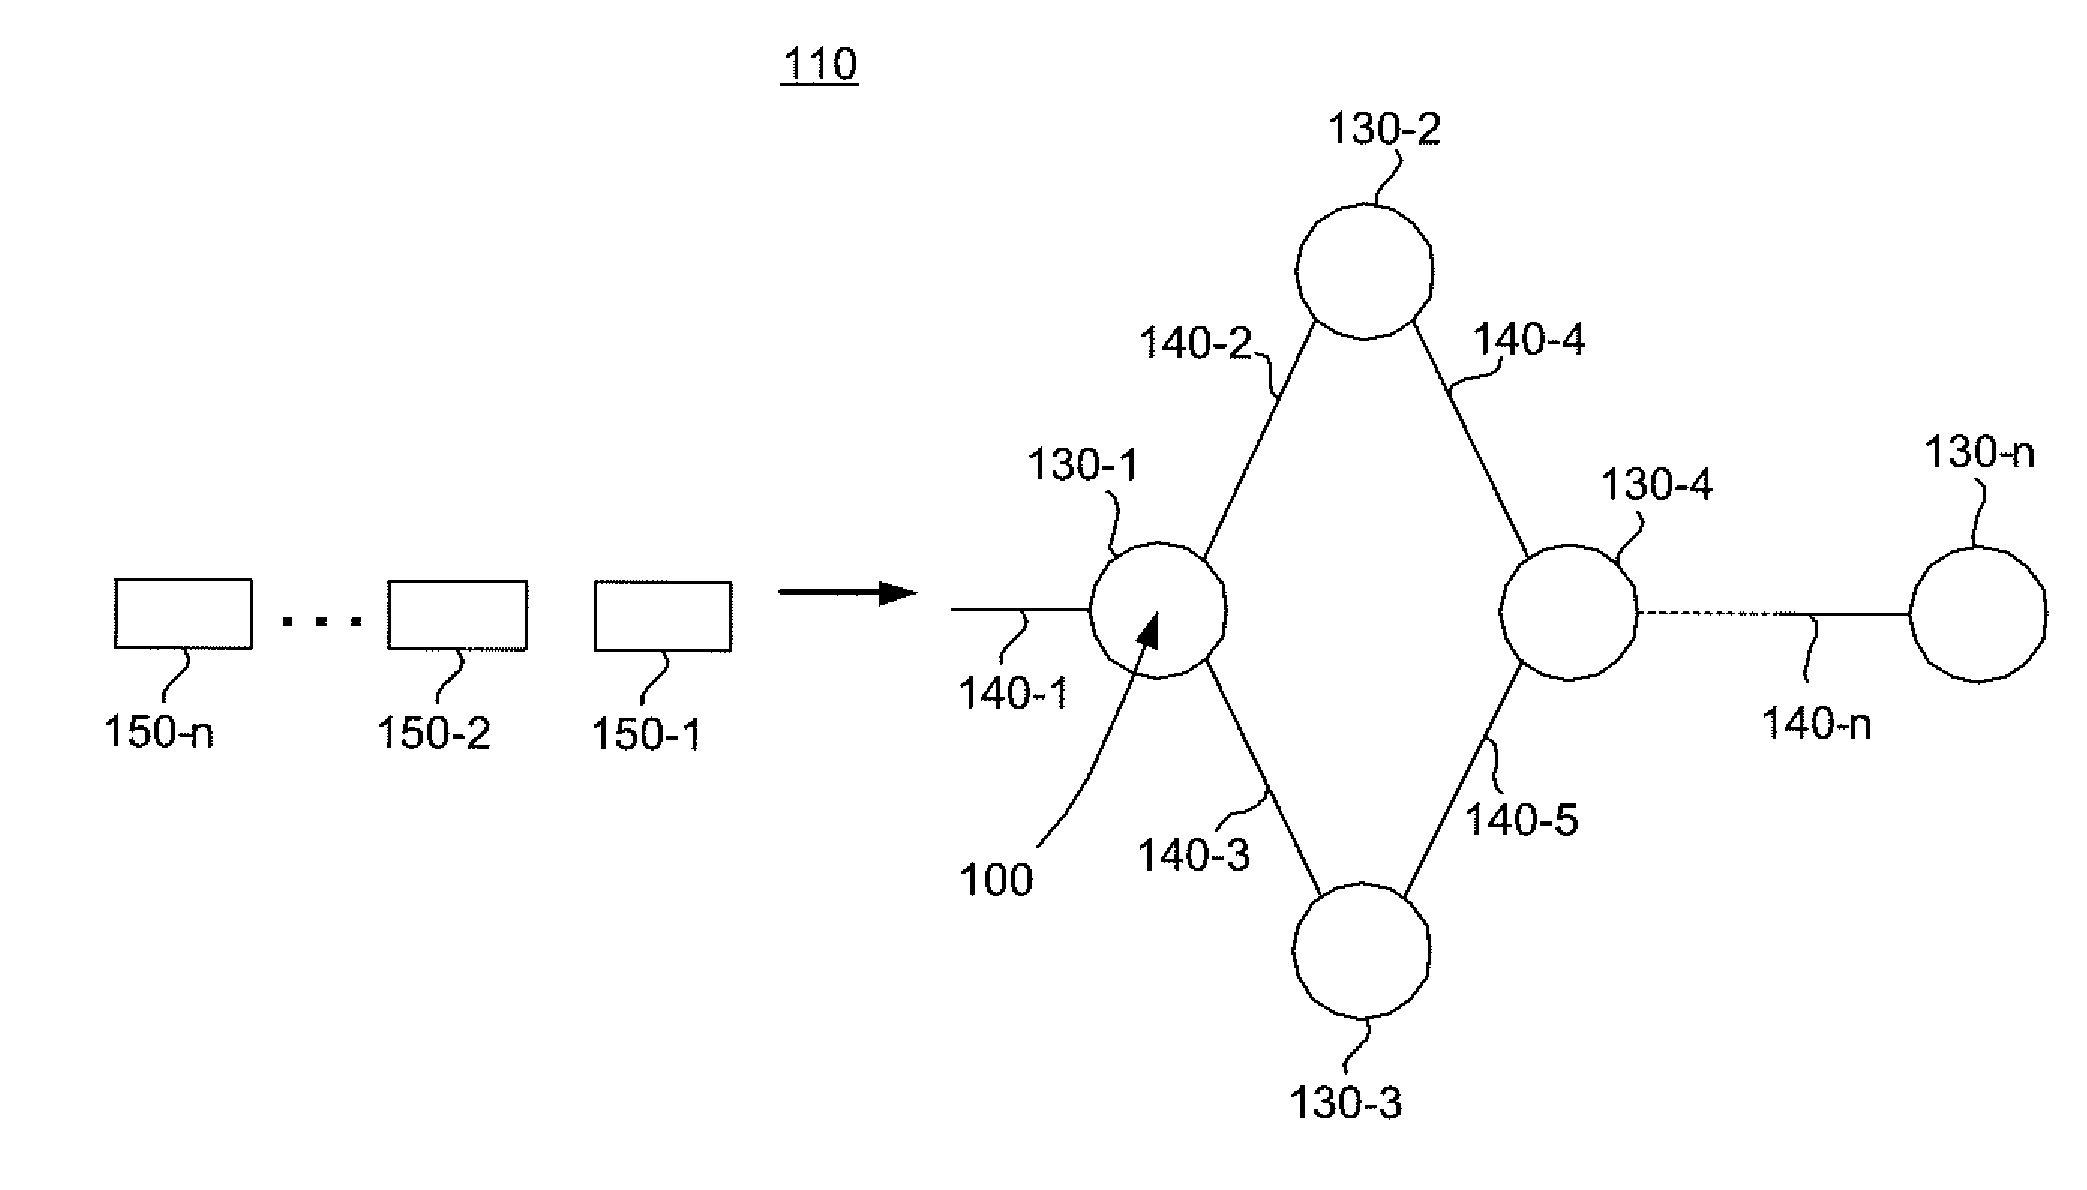 Systems and methods for queue management in packet-switched networks